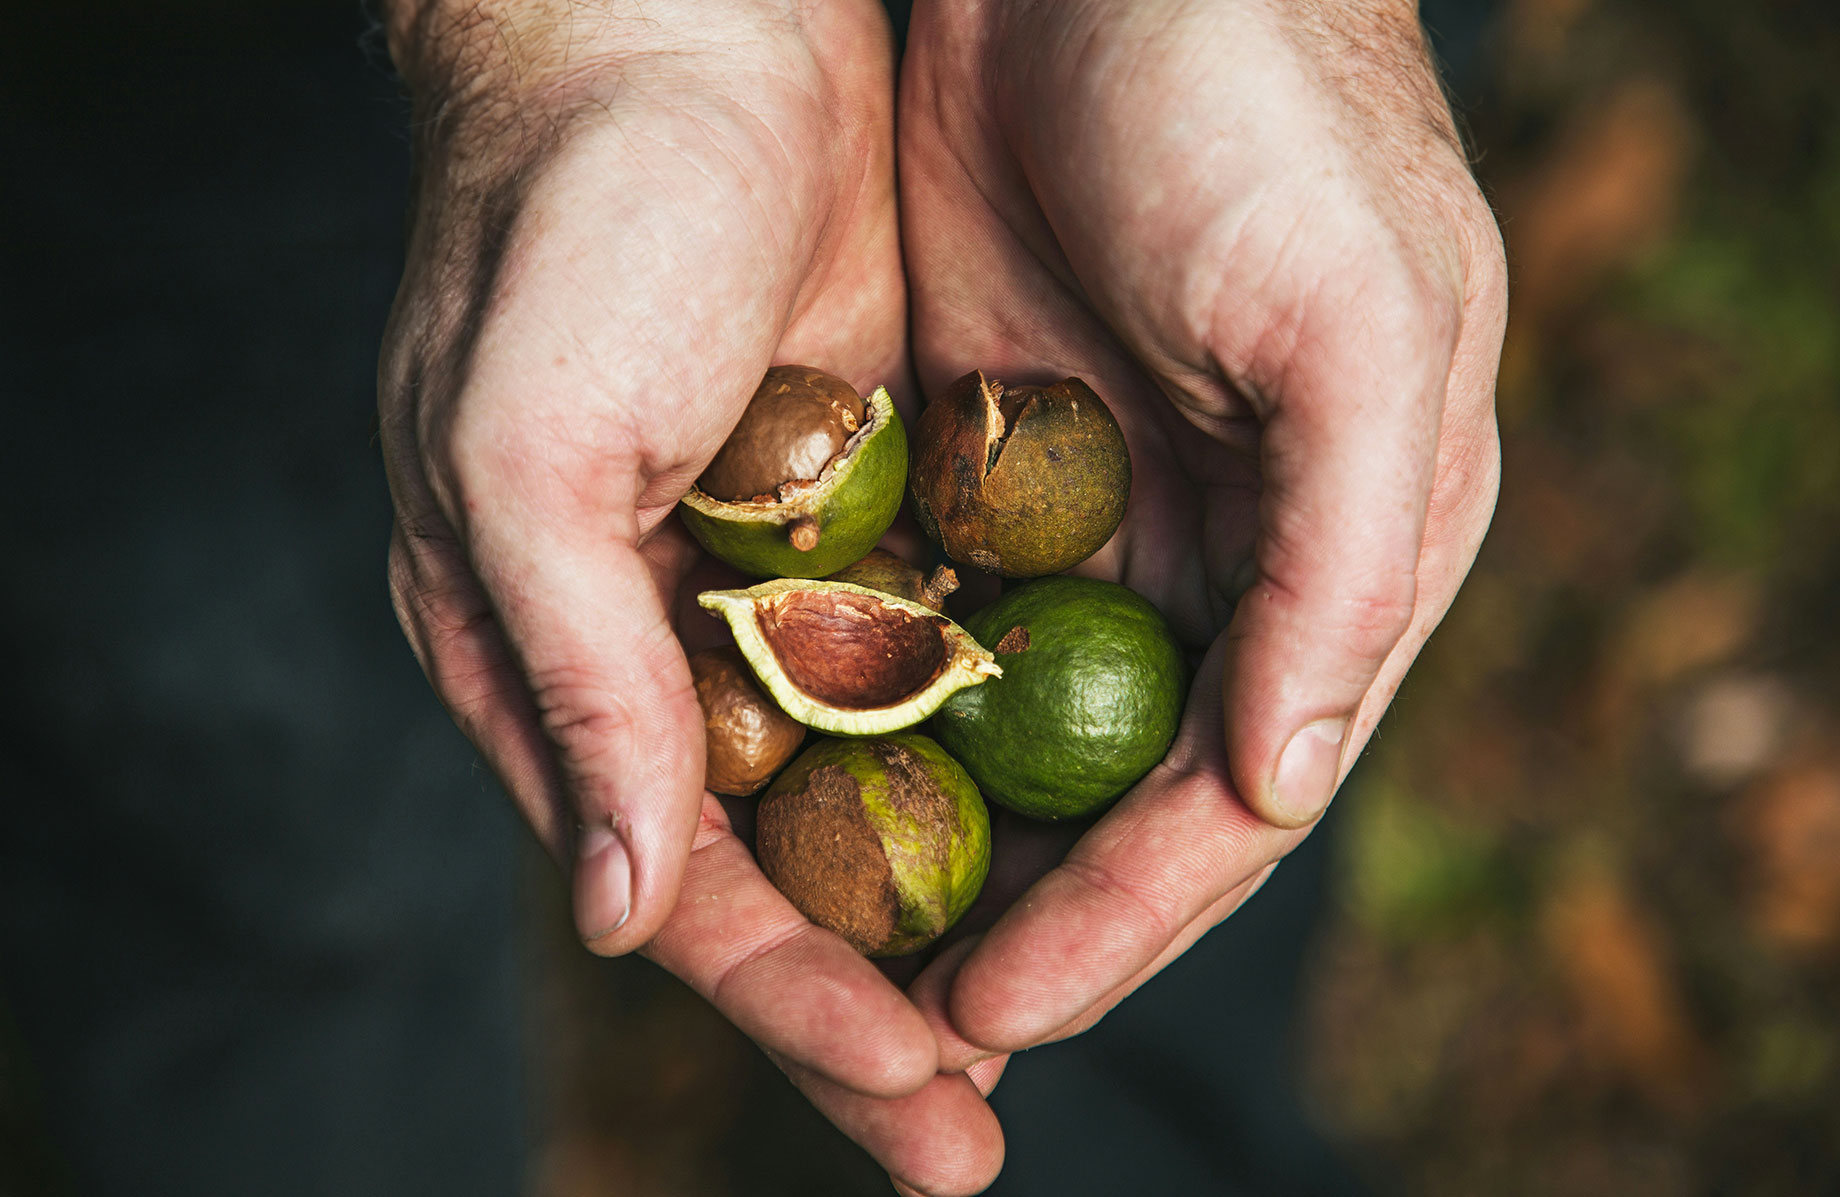 Person Holding Green and Brown Round Fruits